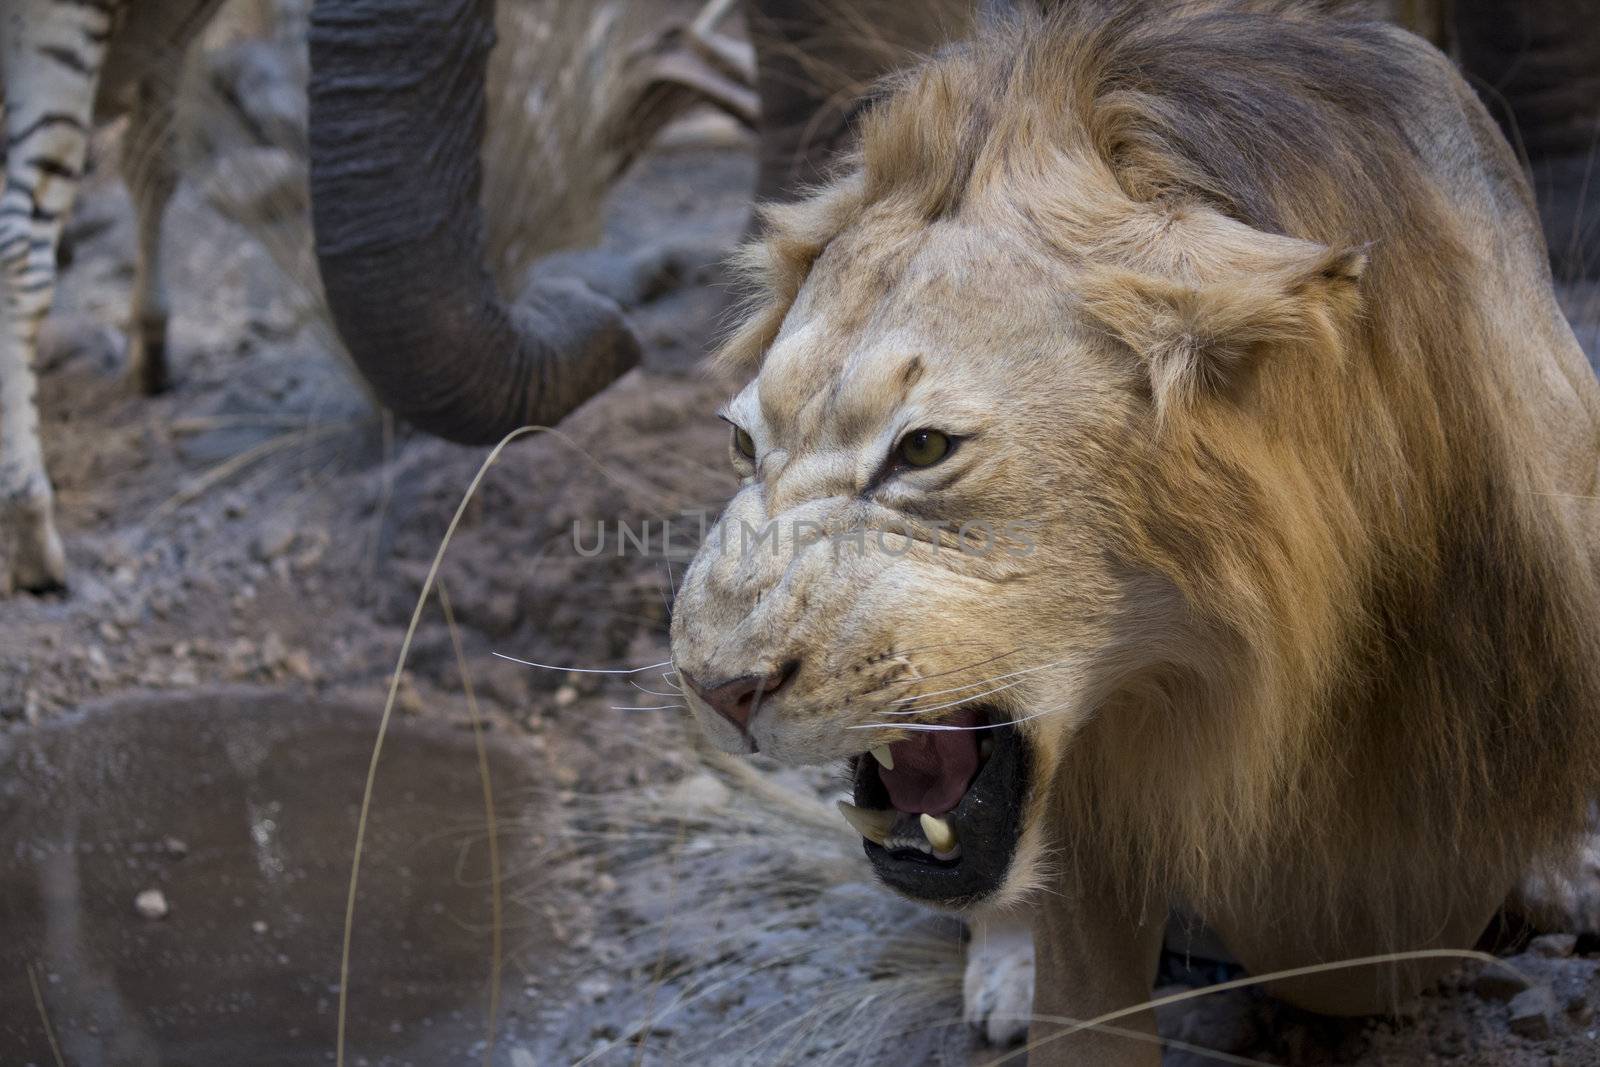 a big scary lion showing his teeth